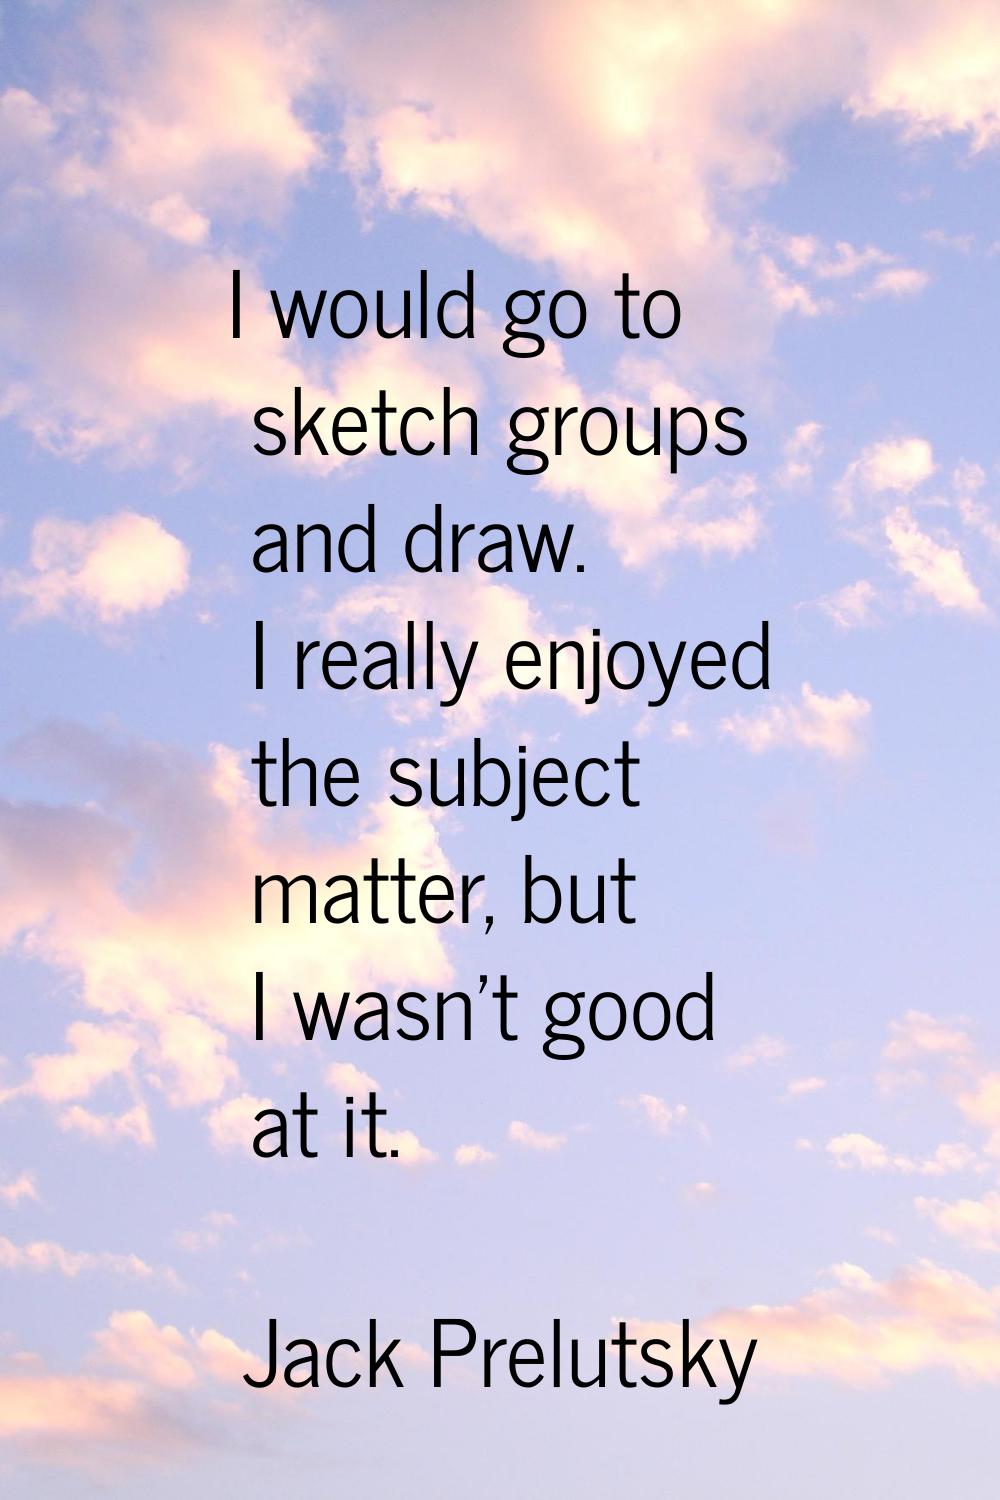 I would go to sketch groups and draw. I really enjoyed the subject matter, but I wasn't good at it.